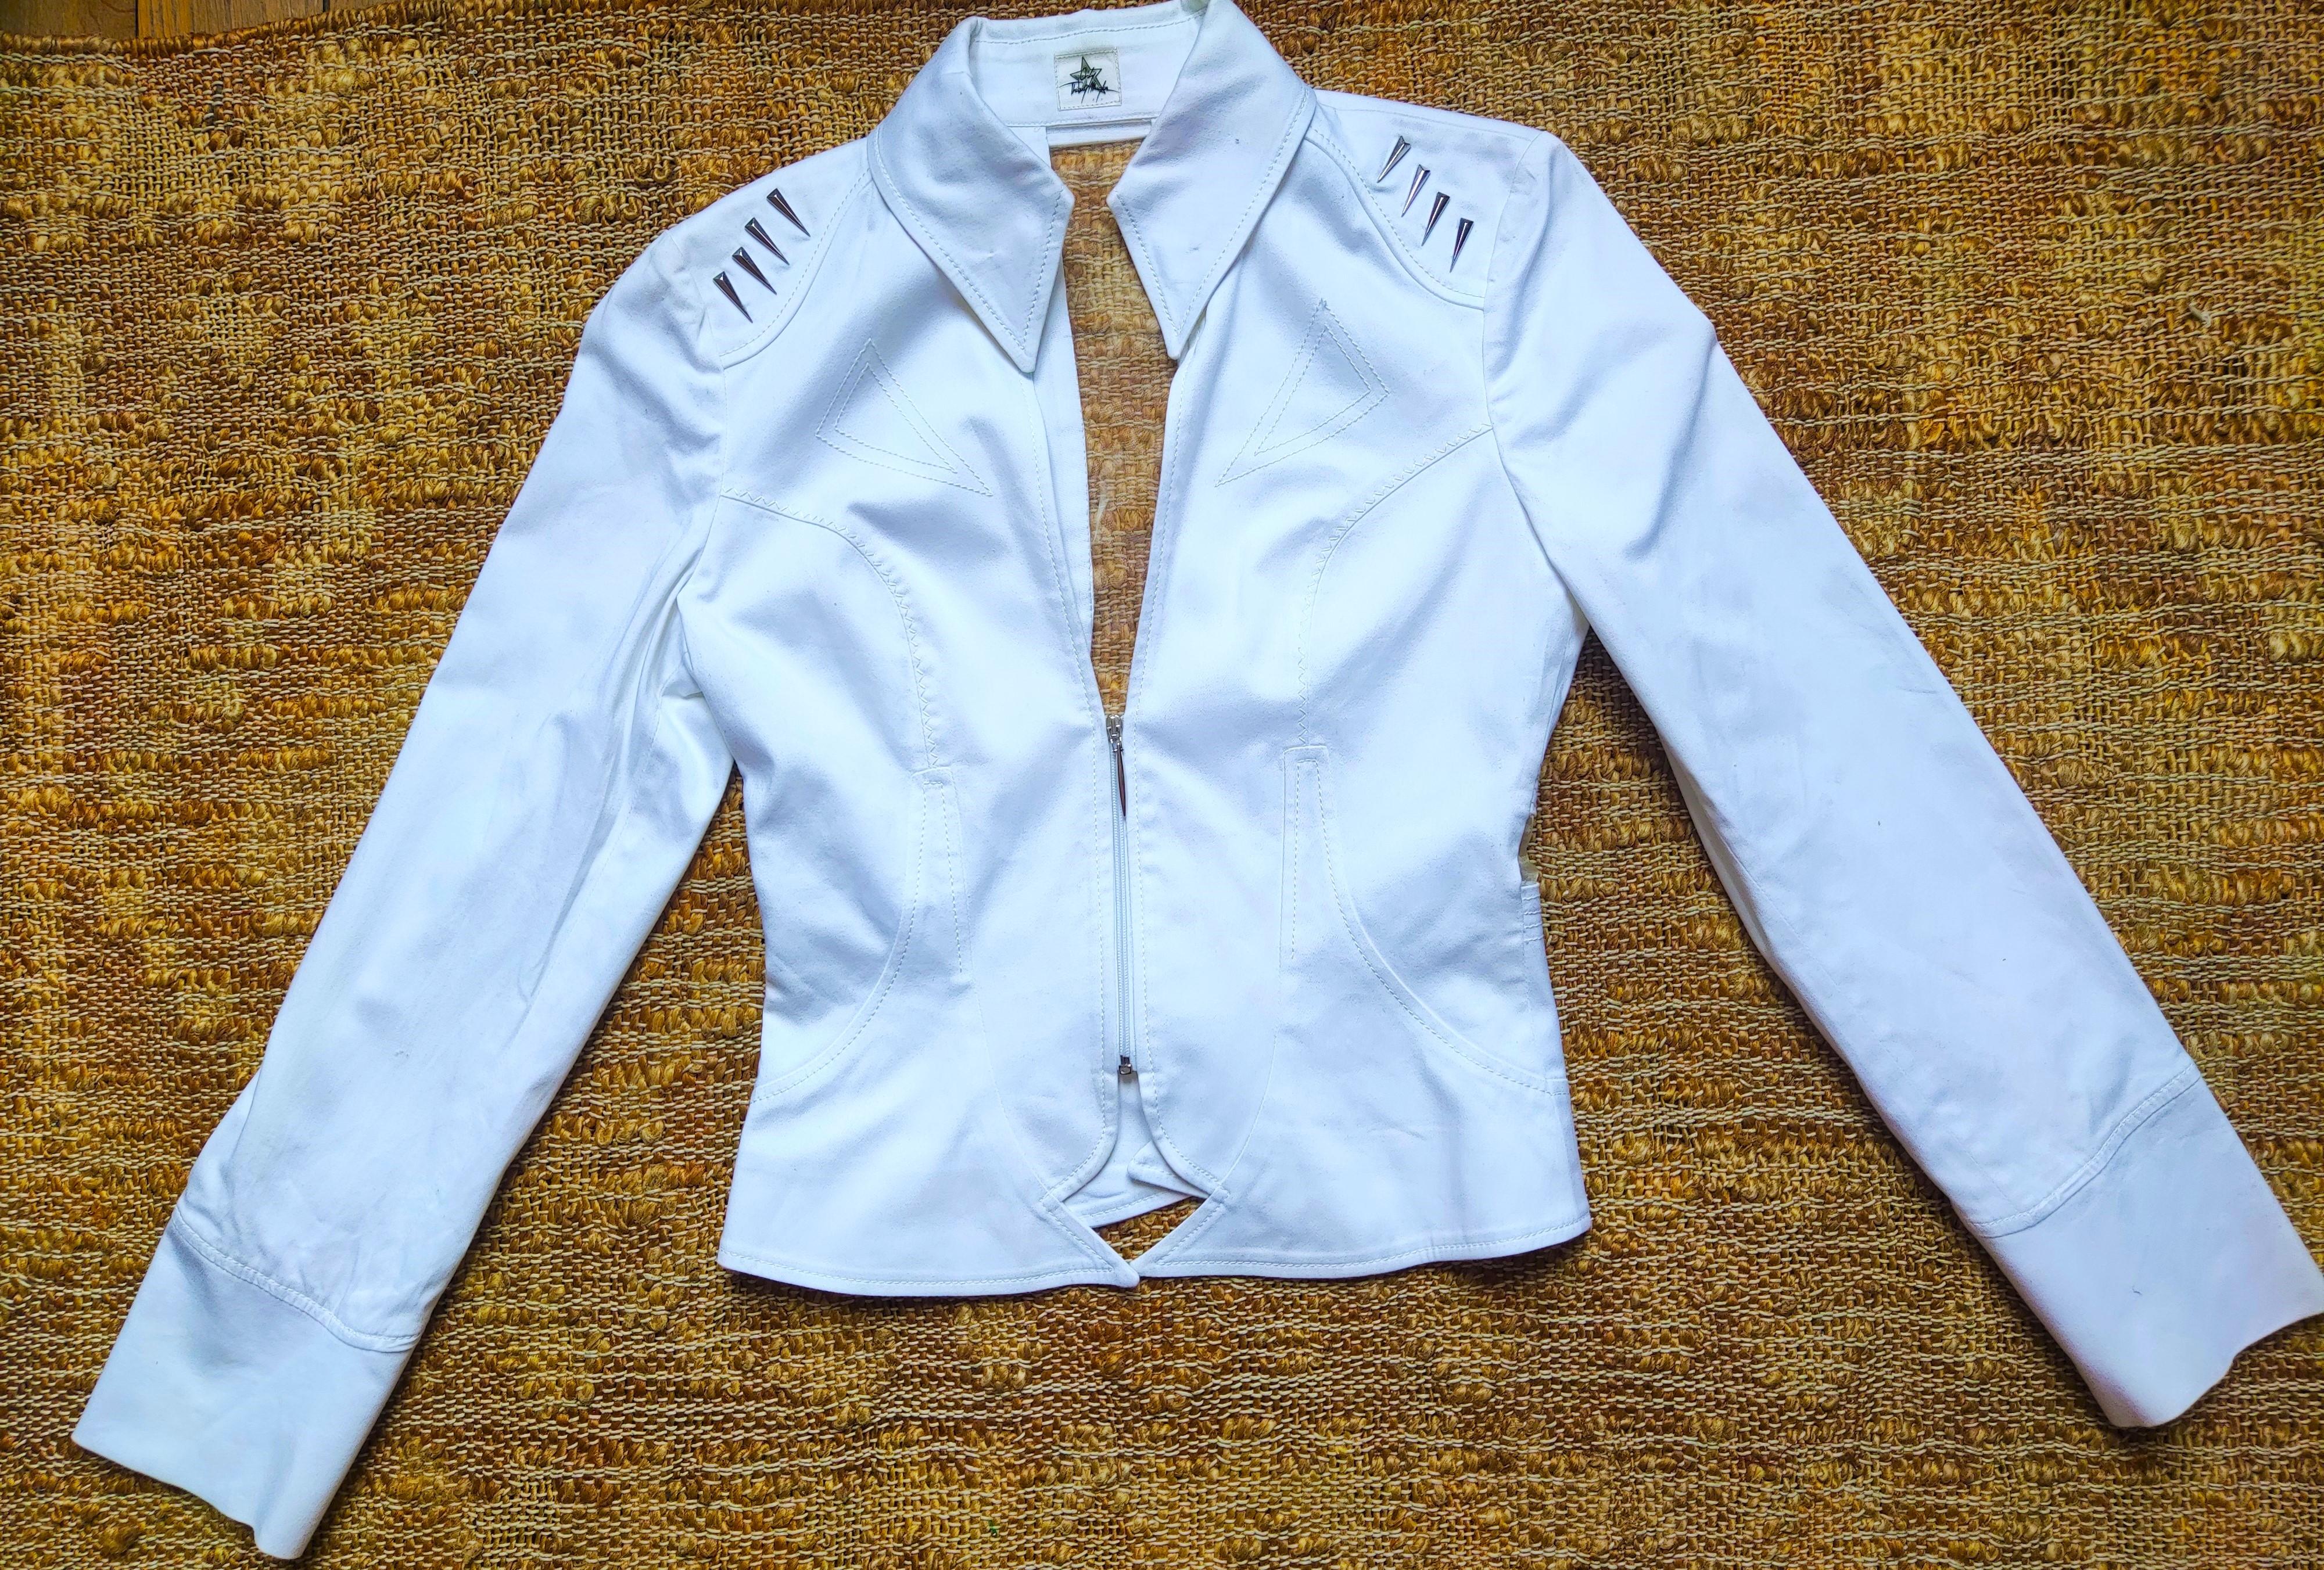 Beautiful panel transparent jacket by Thierry Mugler!
With metal rivets.
Wasp Waist.

LIKE NEW! condition.

SIZE
Medium.
Marked size: IT42 / FR38/ G36/ GB12 / USA8.
Length: 55 cm / 21.6 inch
Bust: 43 cm / 16.9 inch
Waist: 36 cm / 14.2 inch
Shoulder